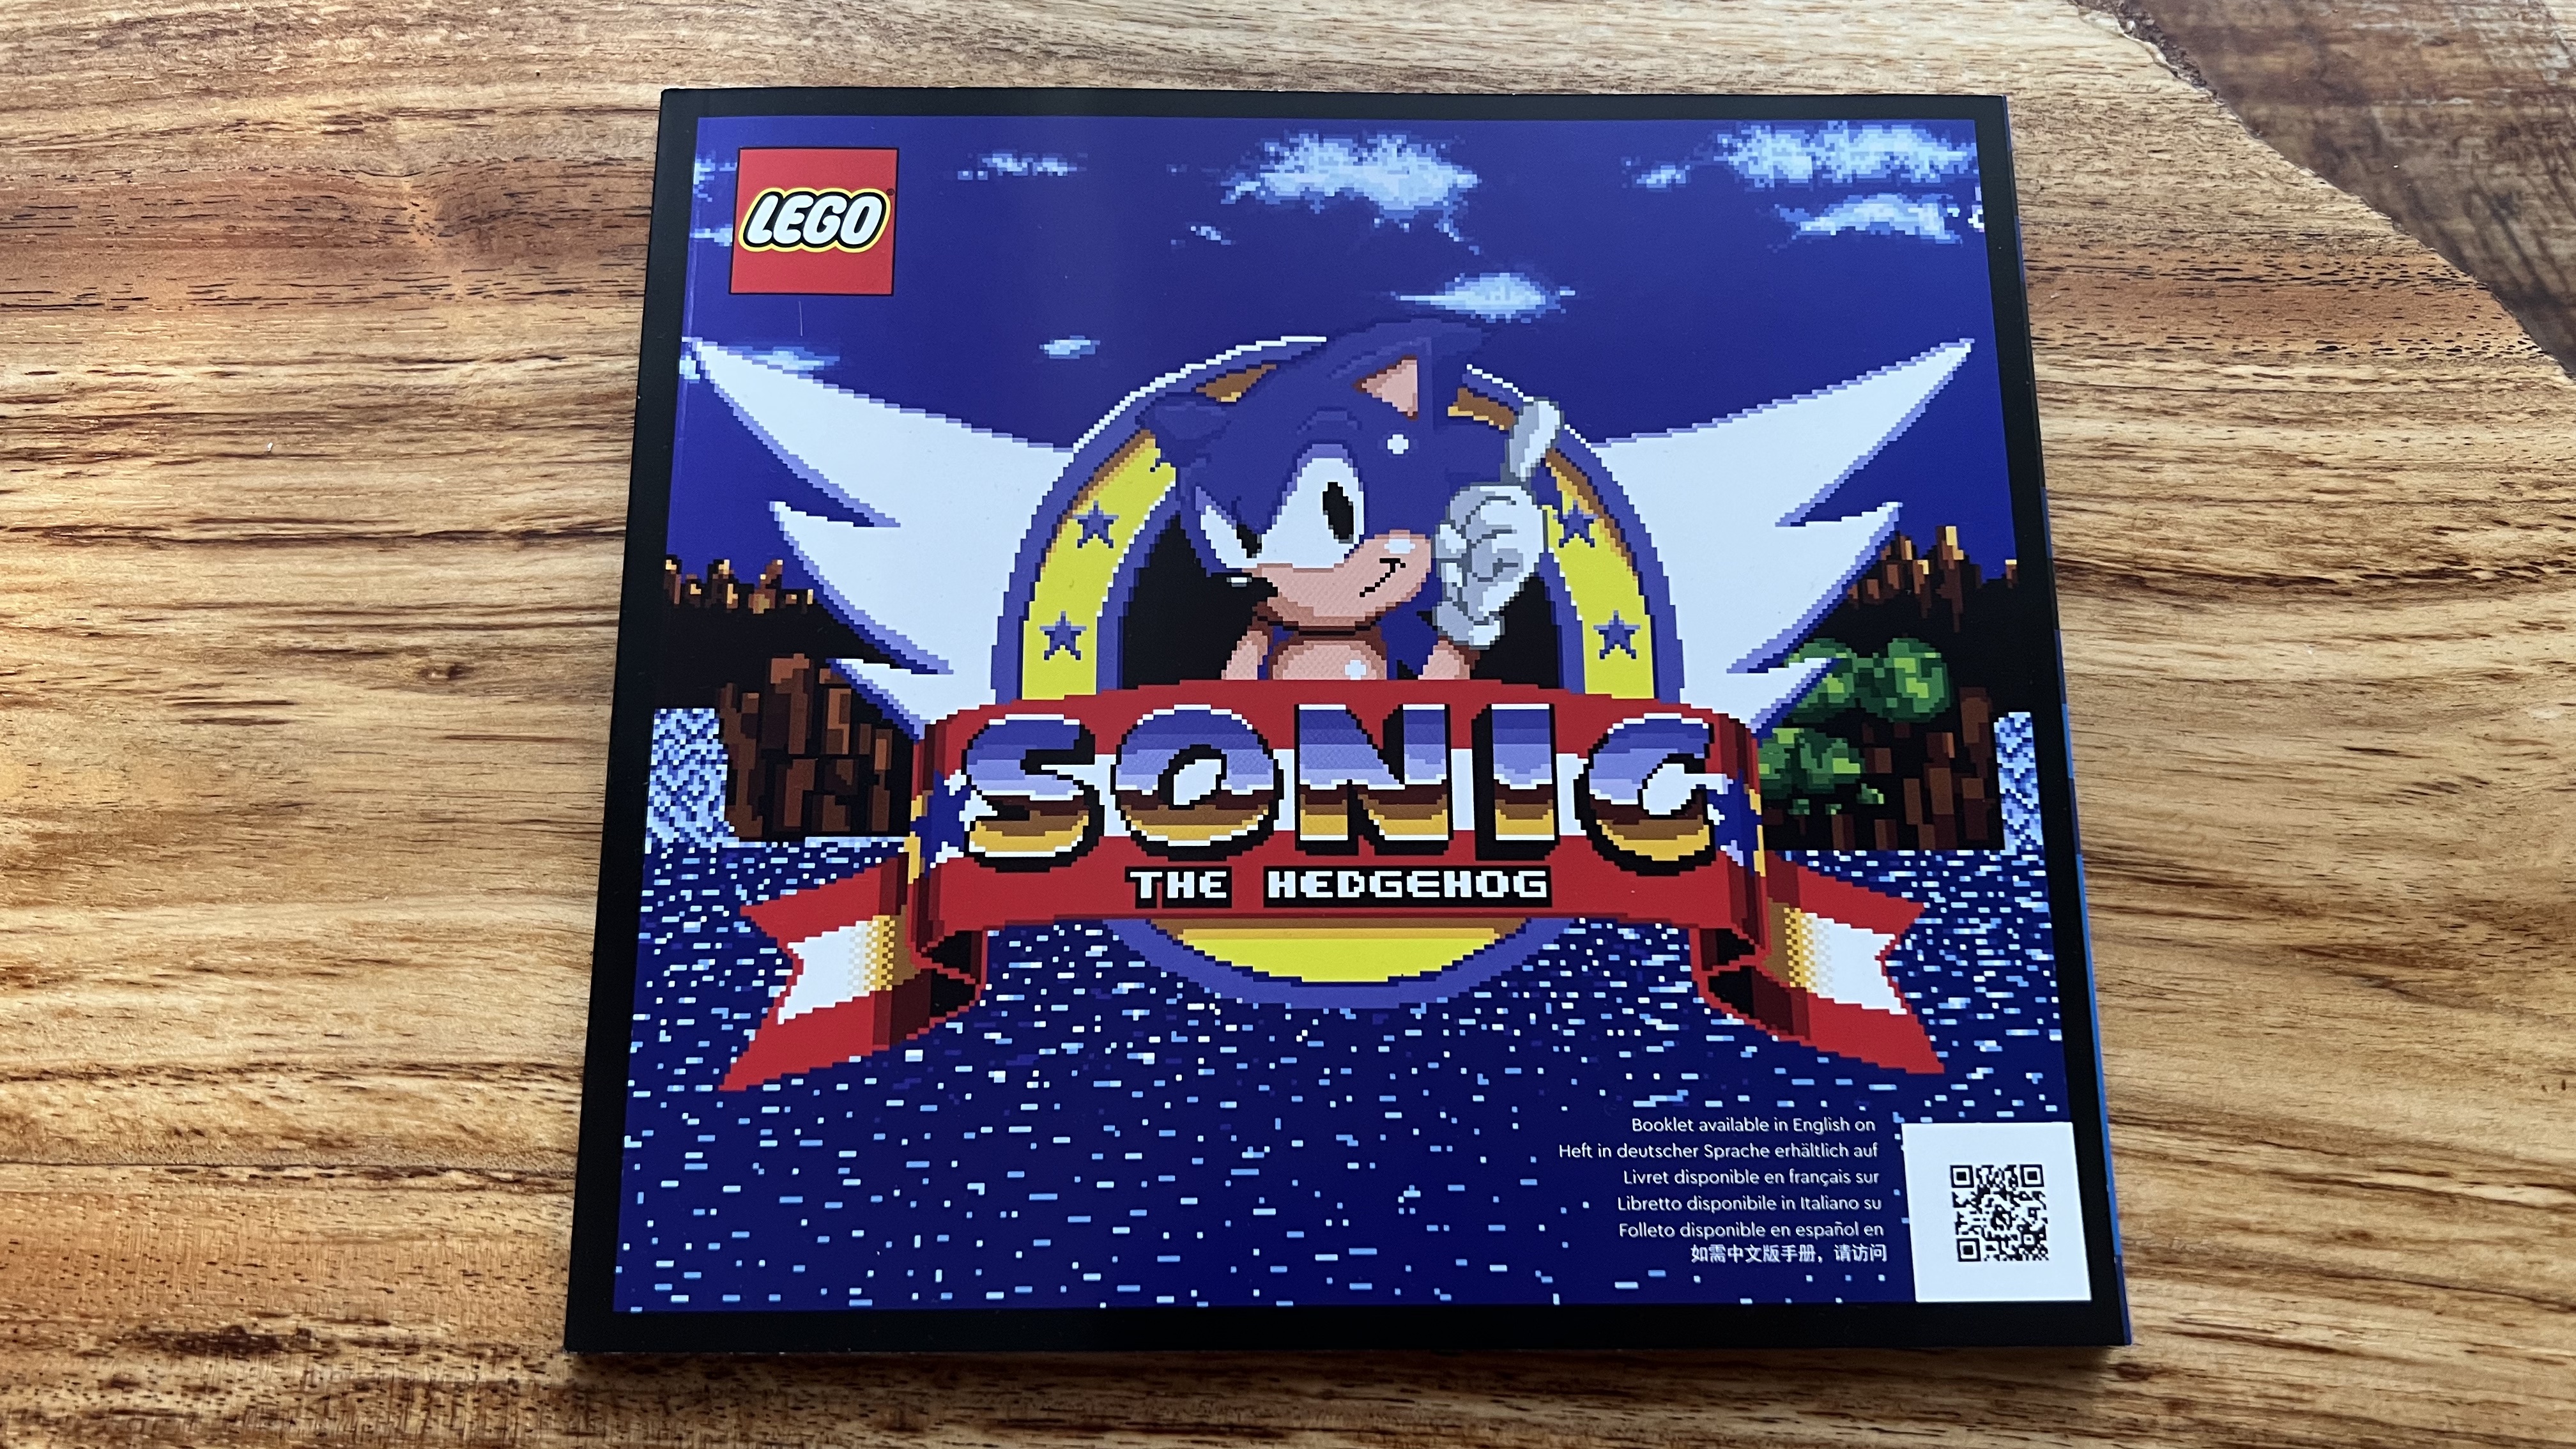 Sonic' LEGO Is Coming. Here Are Three More Brick-Worthy Games.